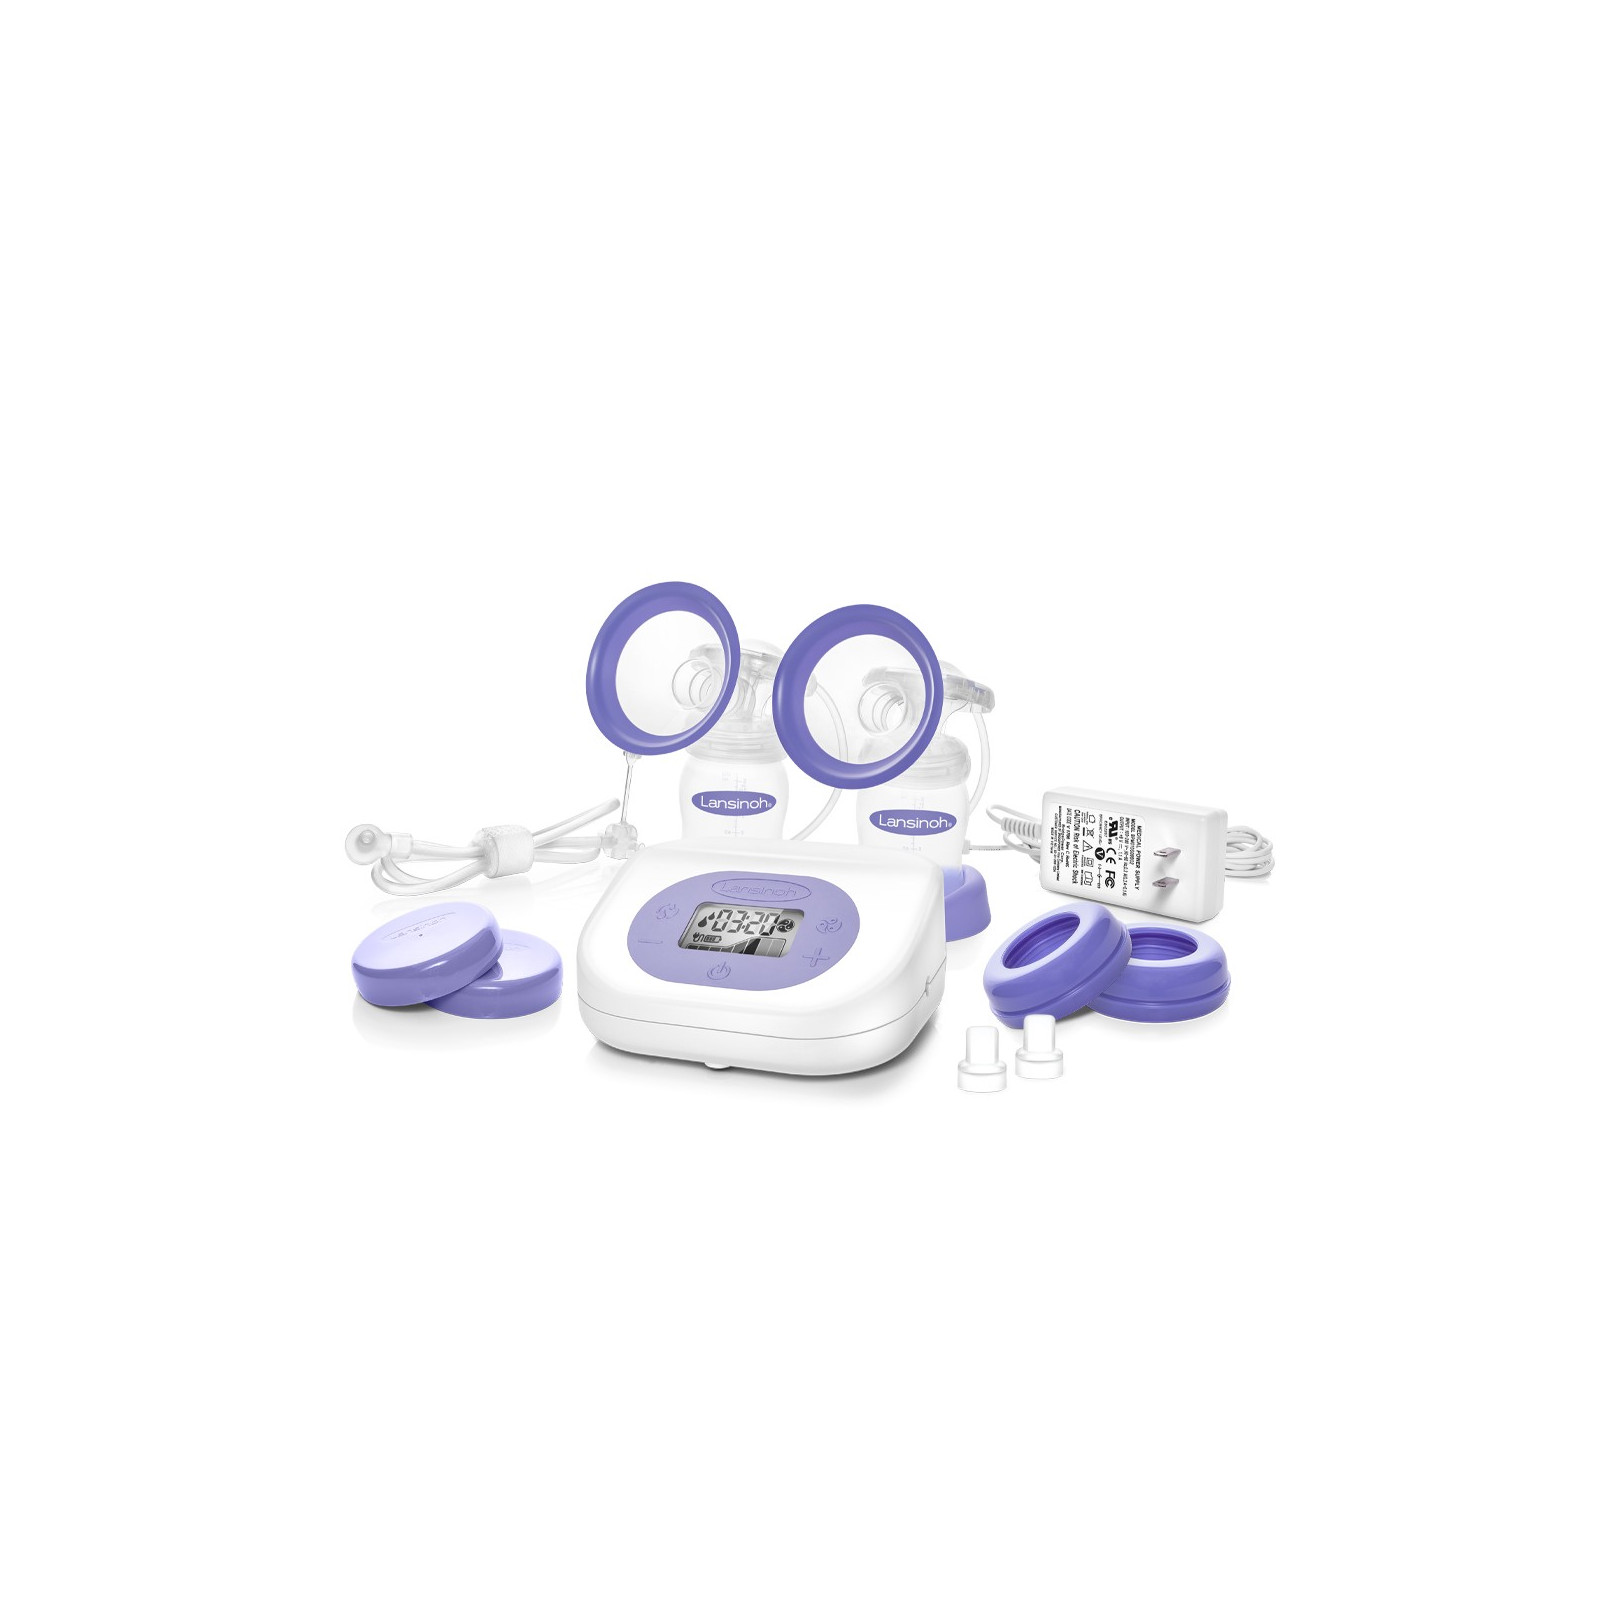 Lansinoh Breast Pump Car Adapter for Electric Breast Pumps